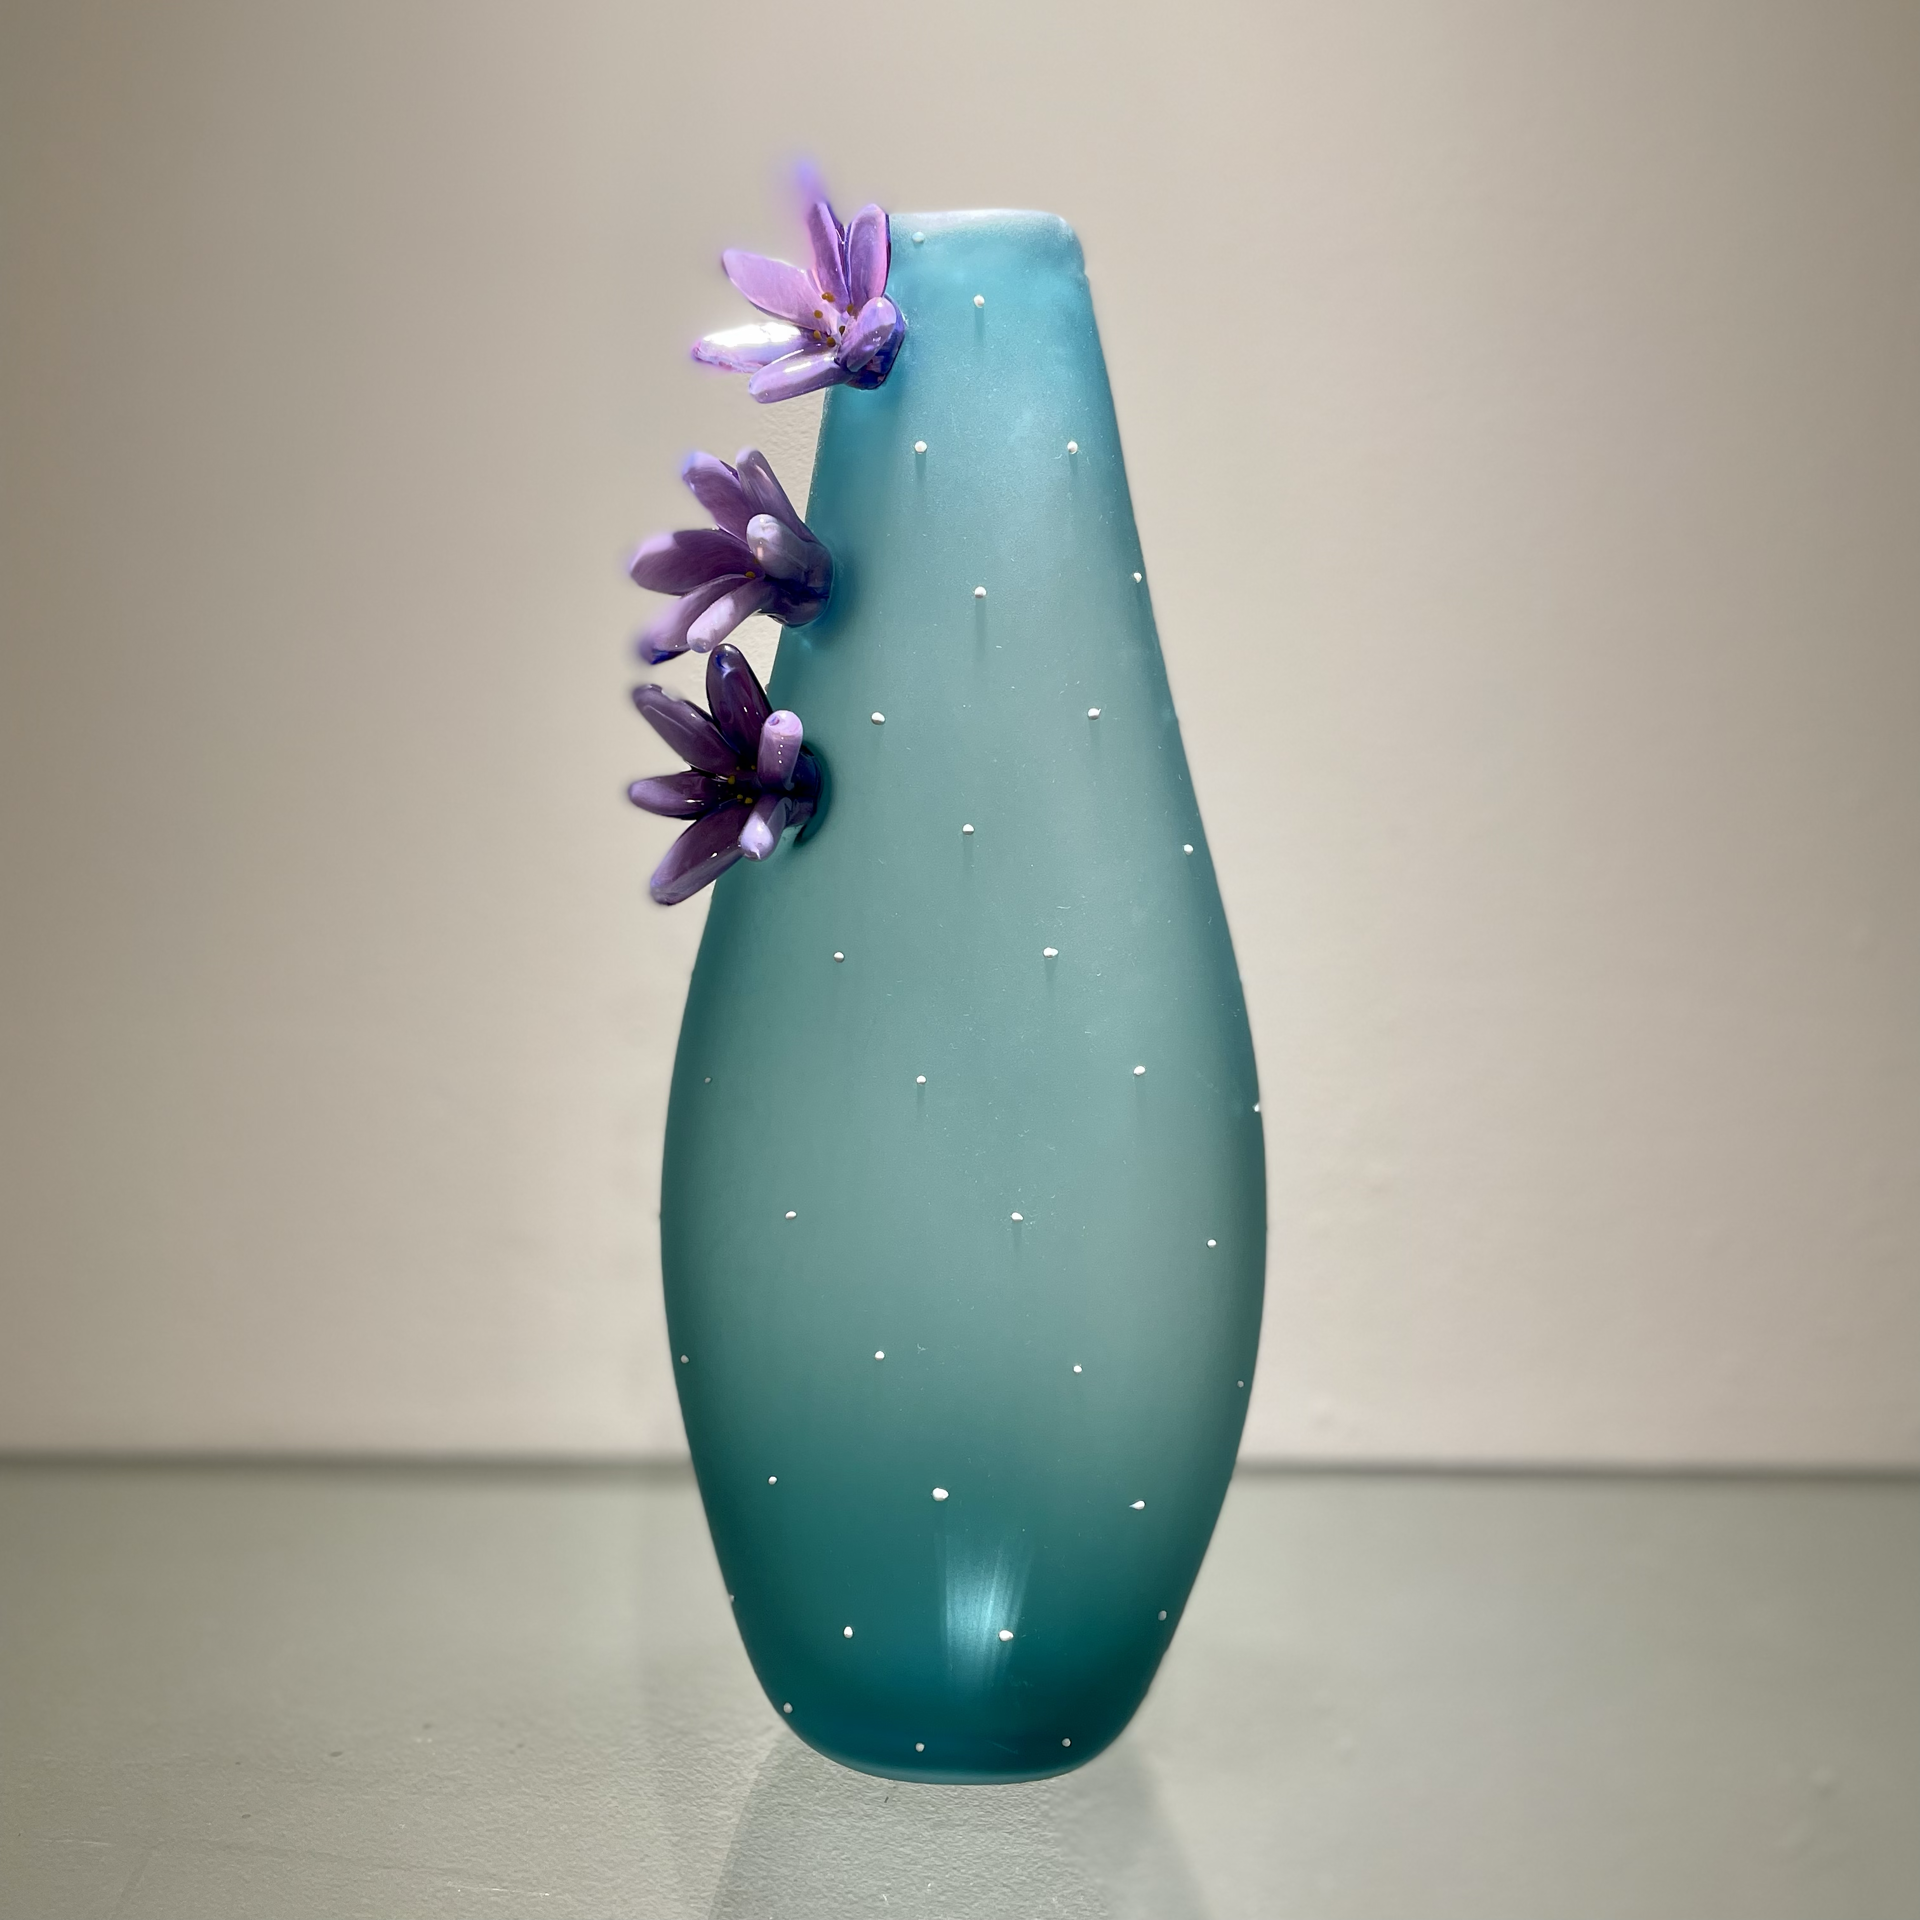 LAGOON - 13" LARGE SLENDER with 3 flowers by Nicholson van Altena Glass